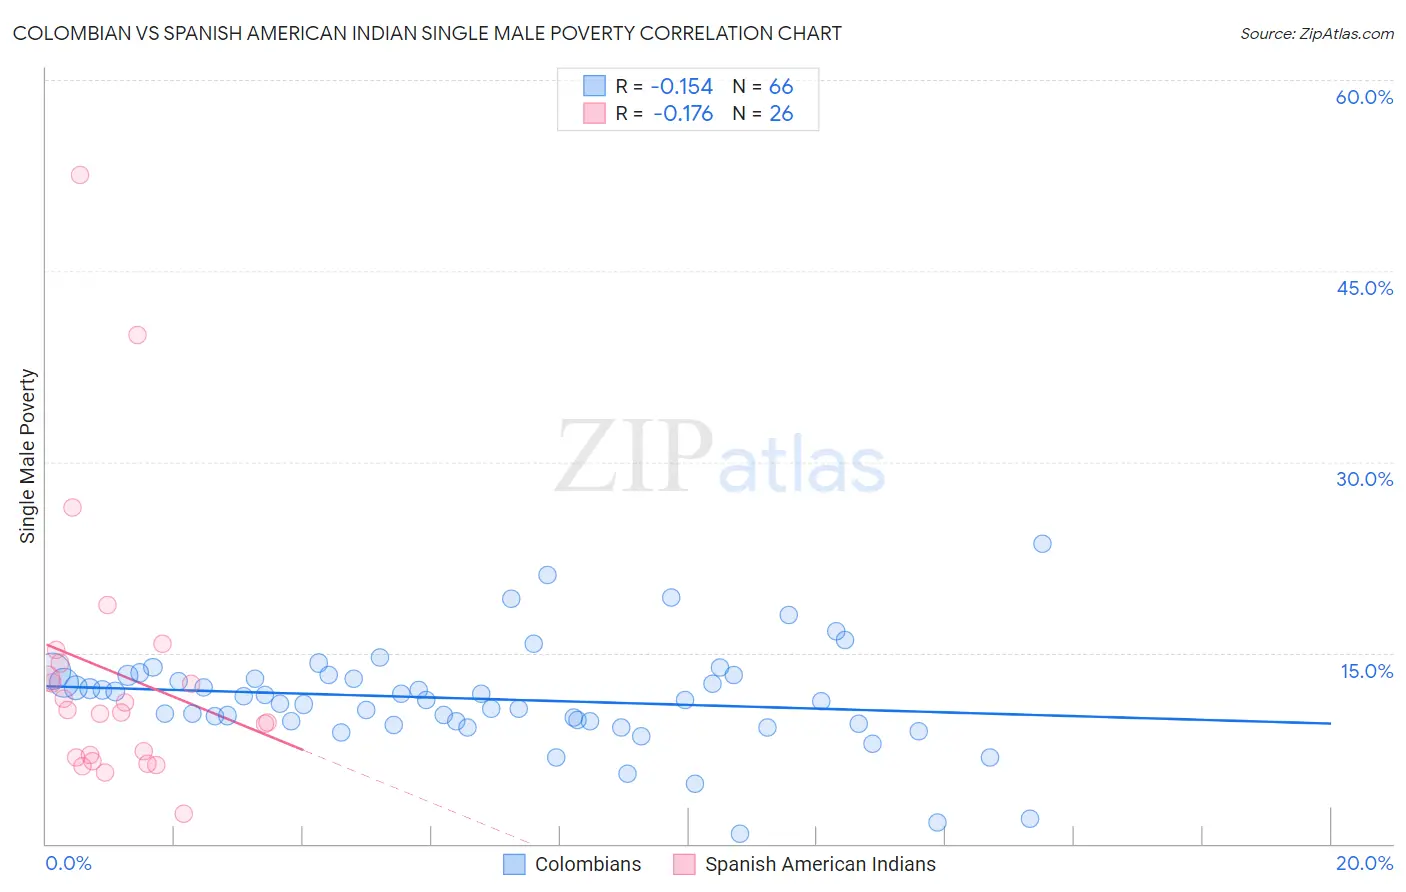 Colombian vs Spanish American Indian Single Male Poverty